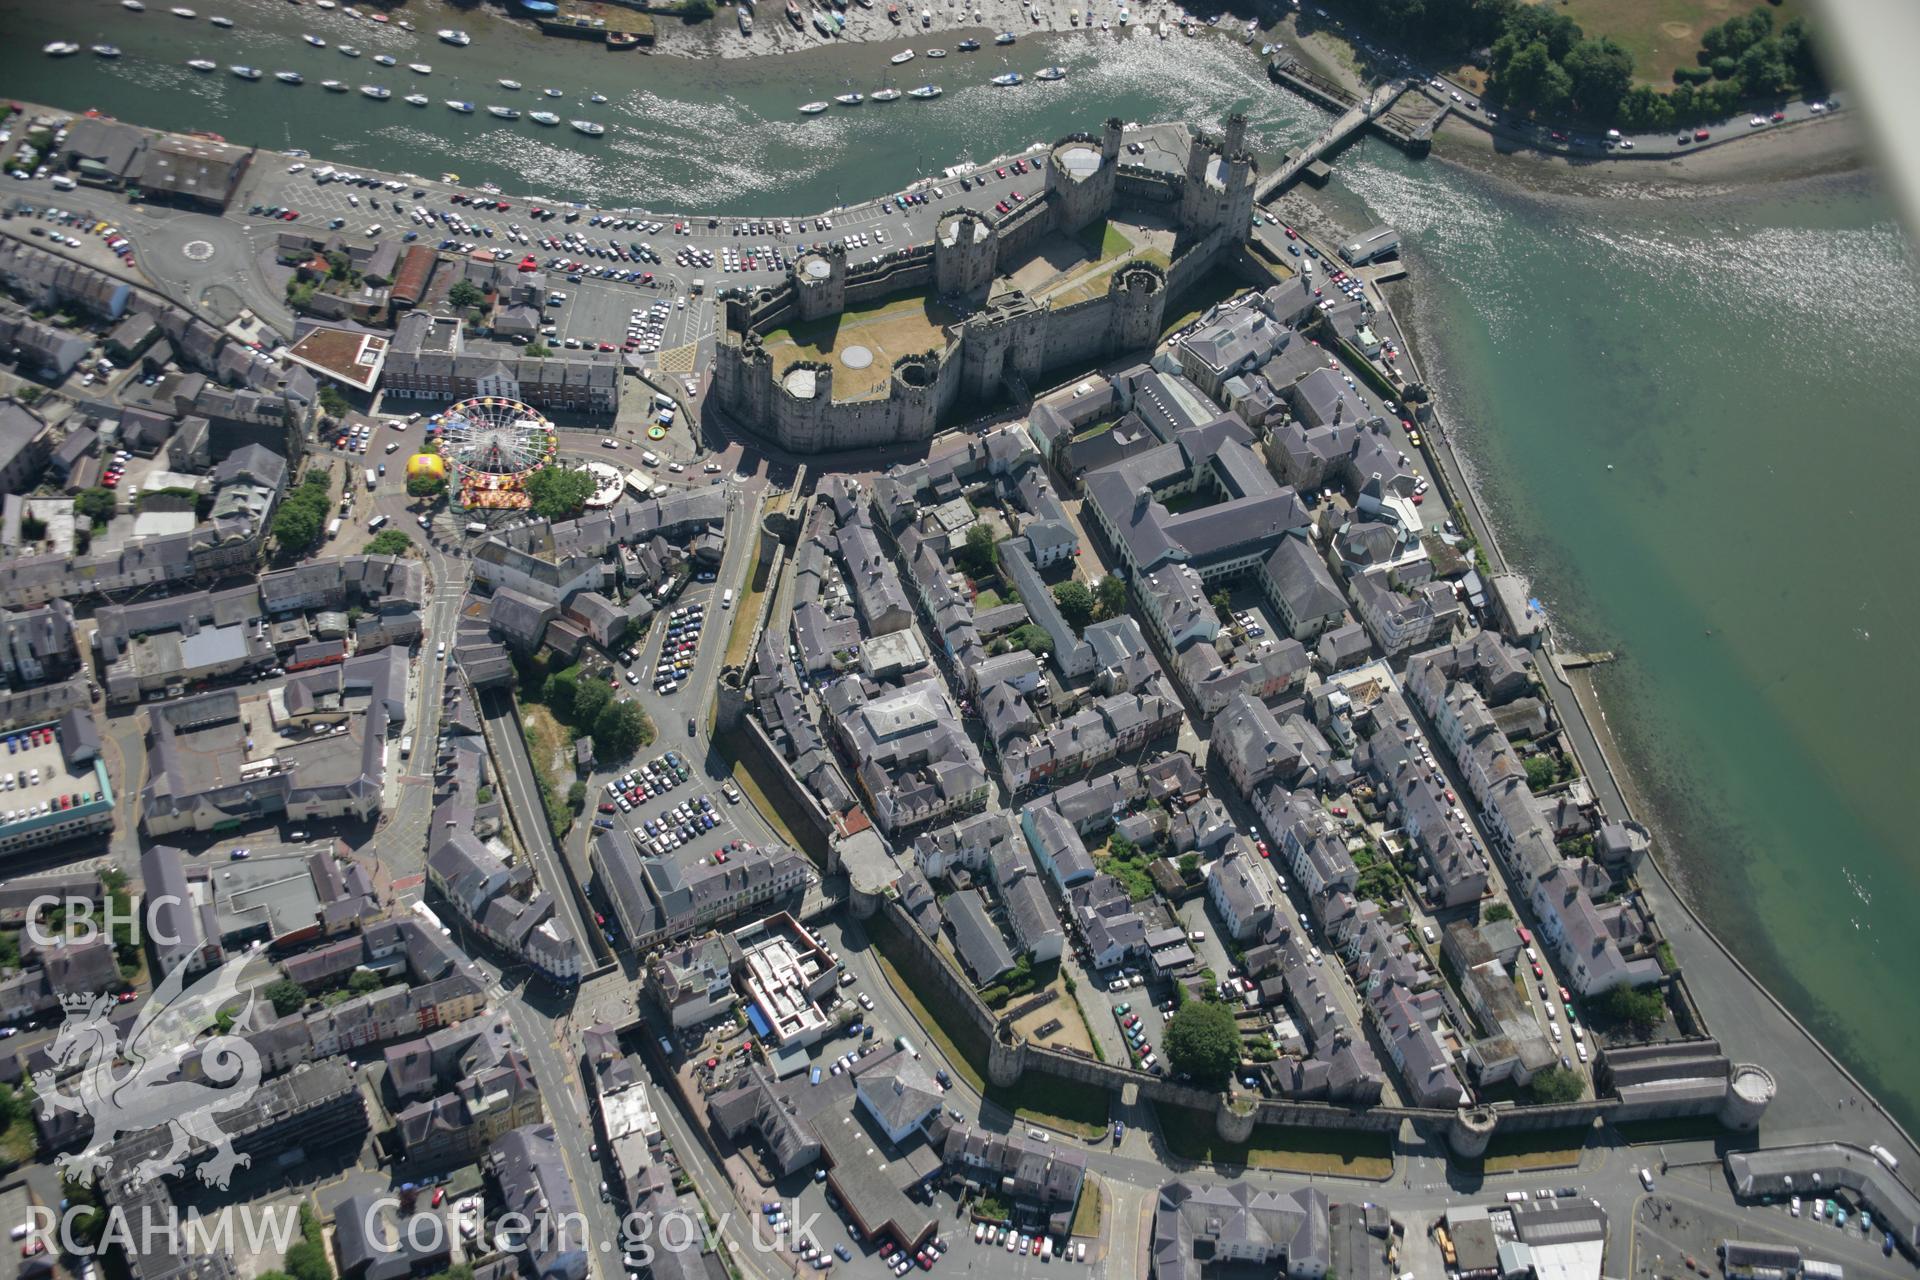 RCAHMW colour oblique aerial photograph of Caernarfon Castle. Taken on 25 July 2006 by Toby Driver.